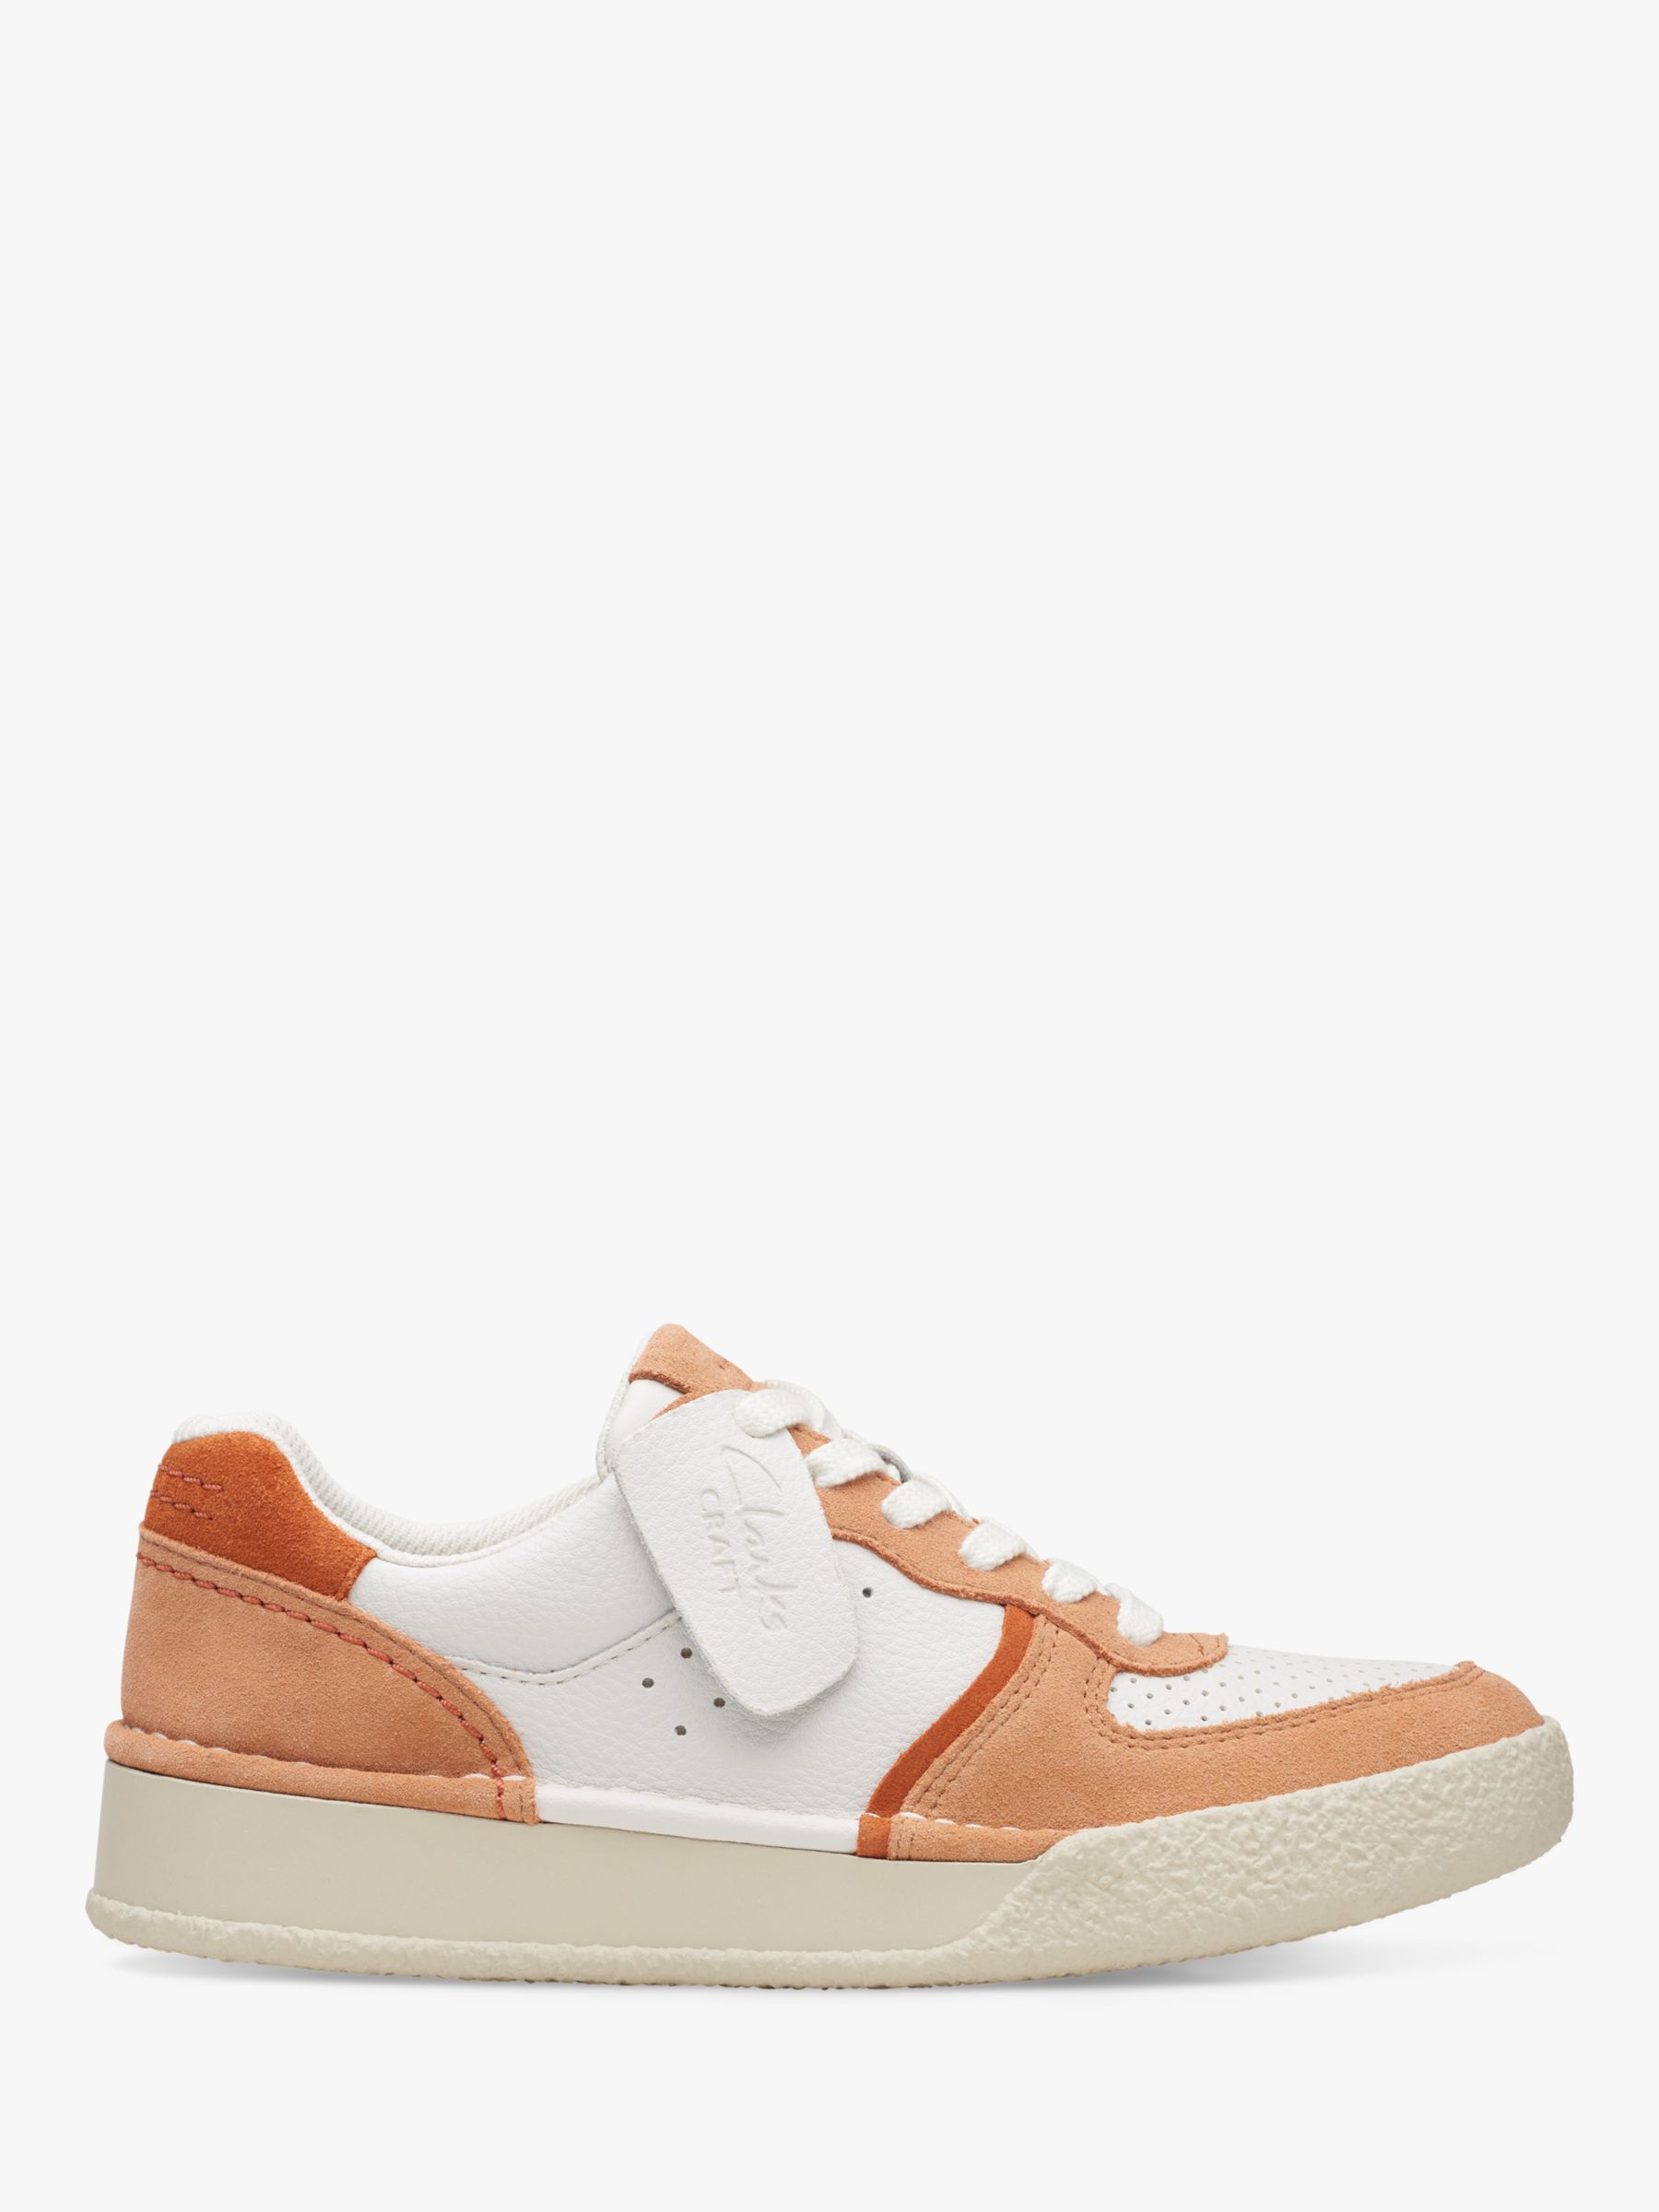 Clarks Craft Cup Court Trainers, Sandstone at John Lewis & Partners